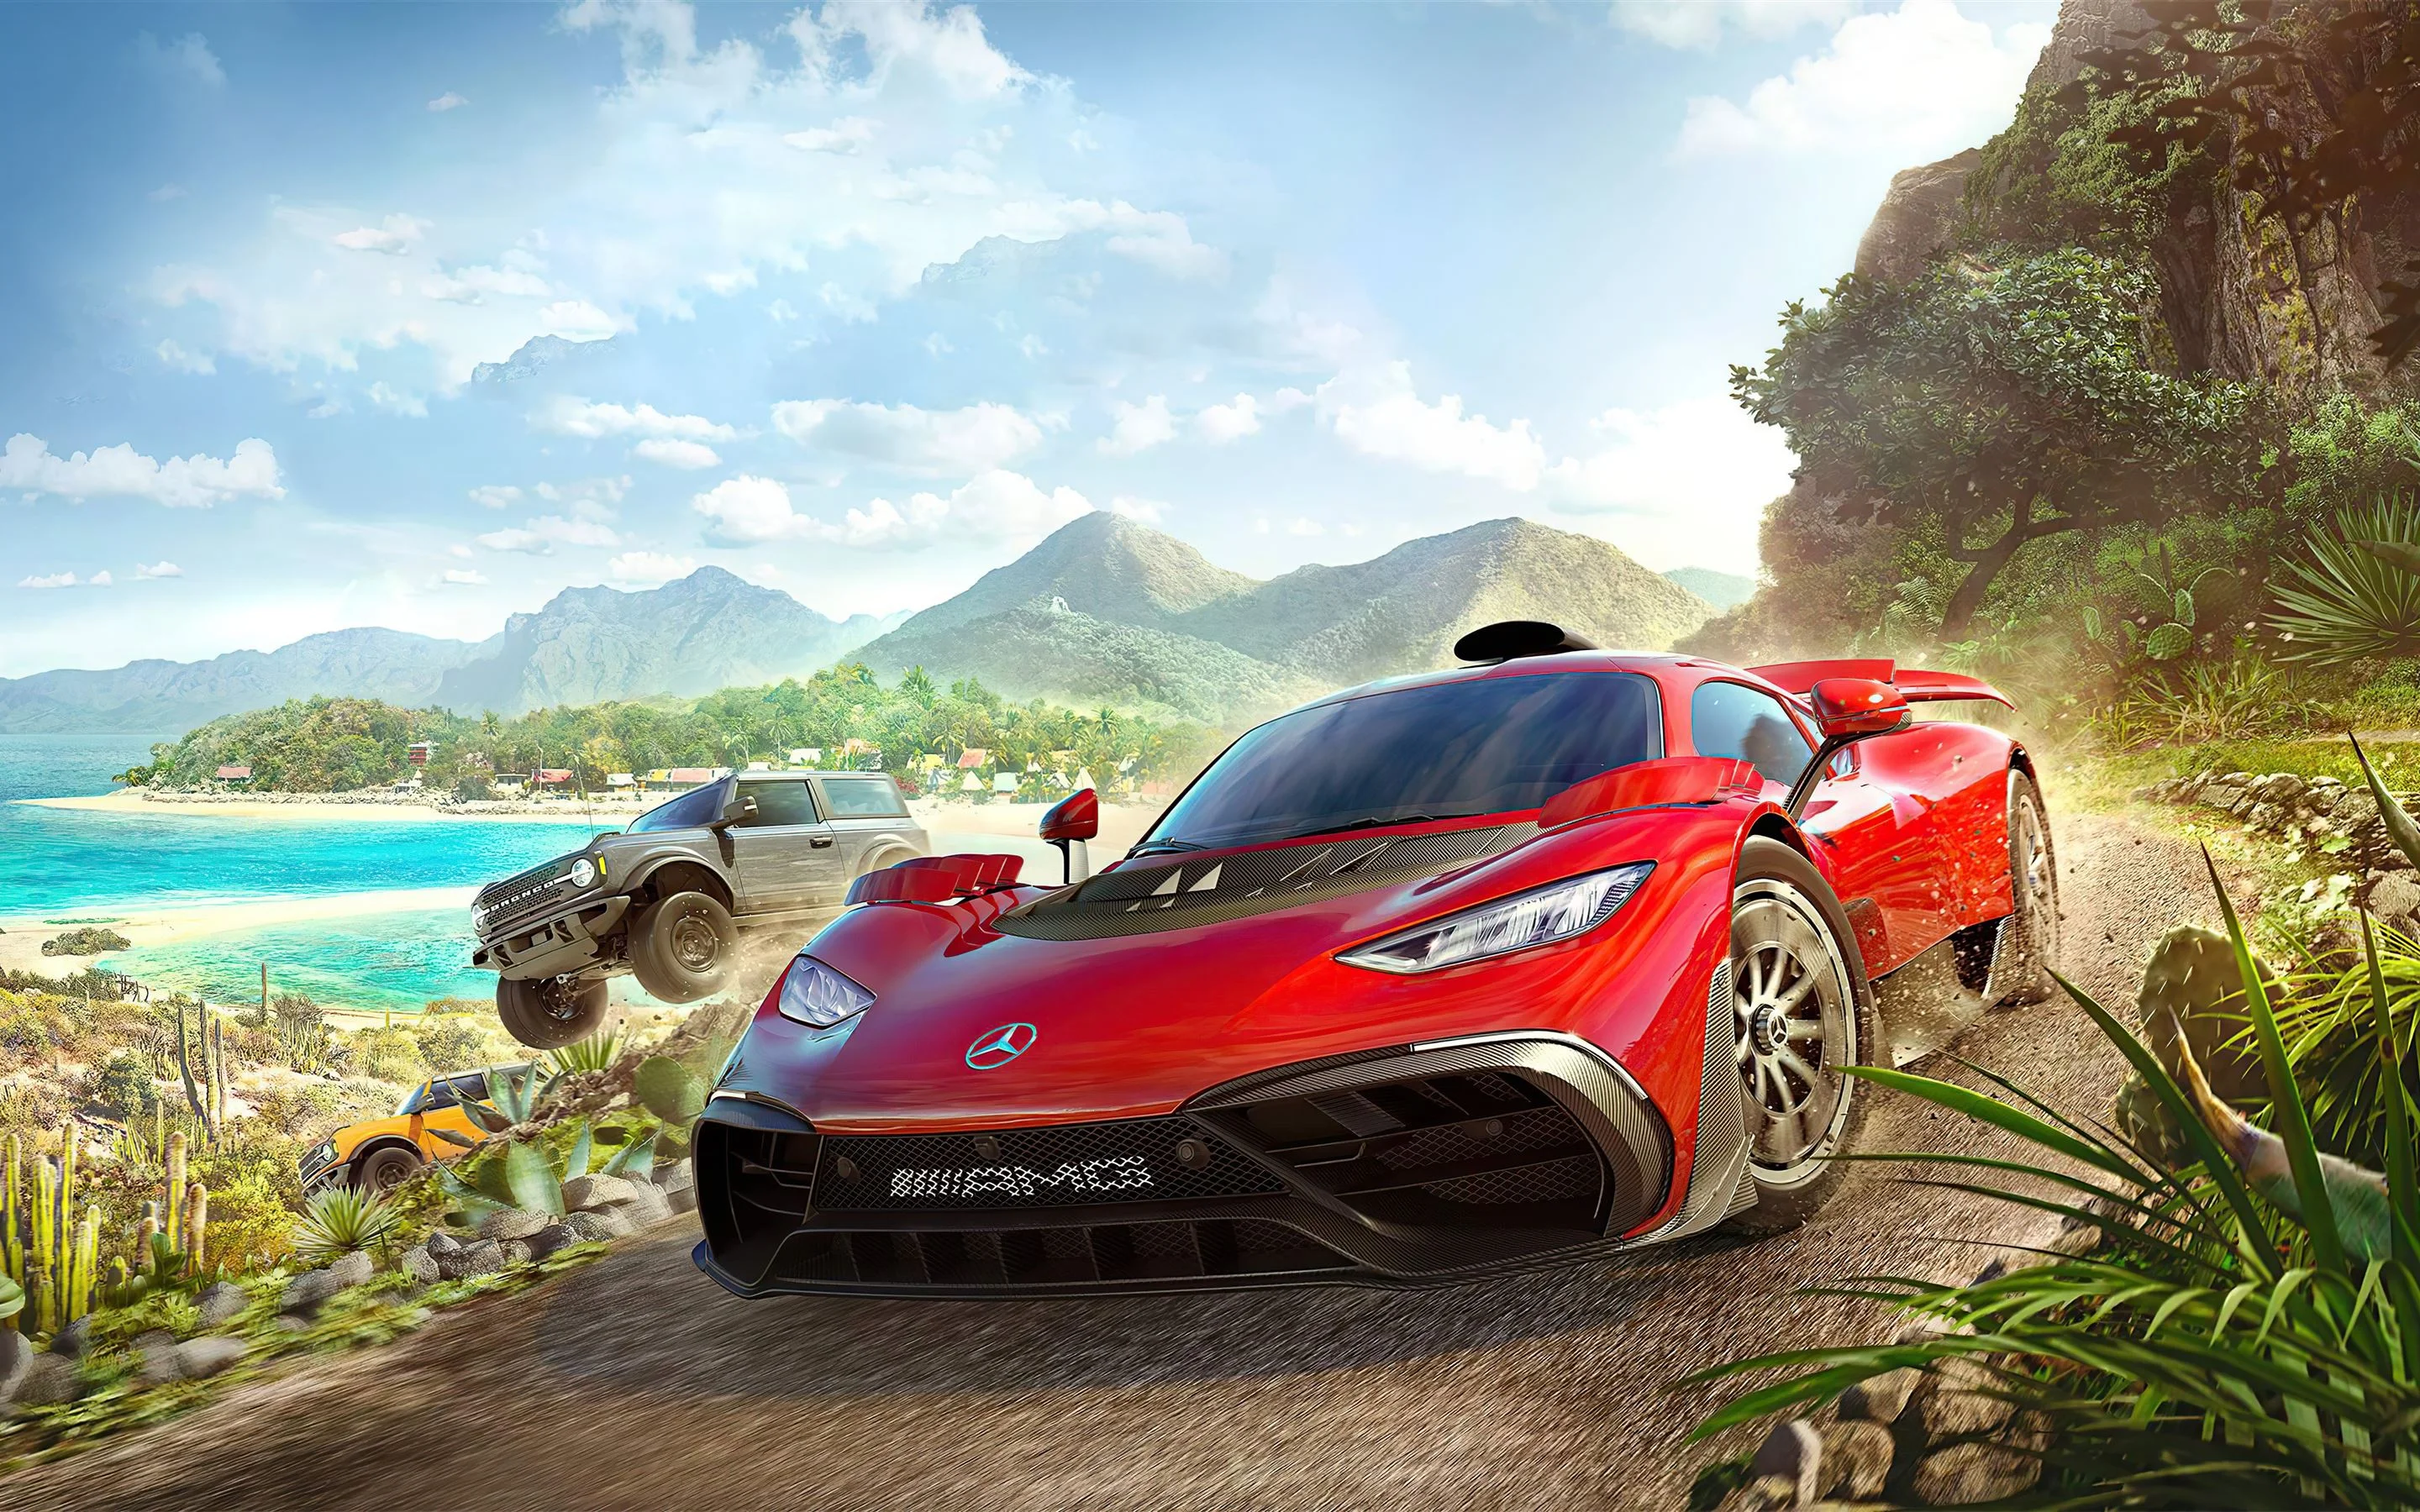 In the latest Forza Horizon 5 update, developers will expand the functionality of the race designer